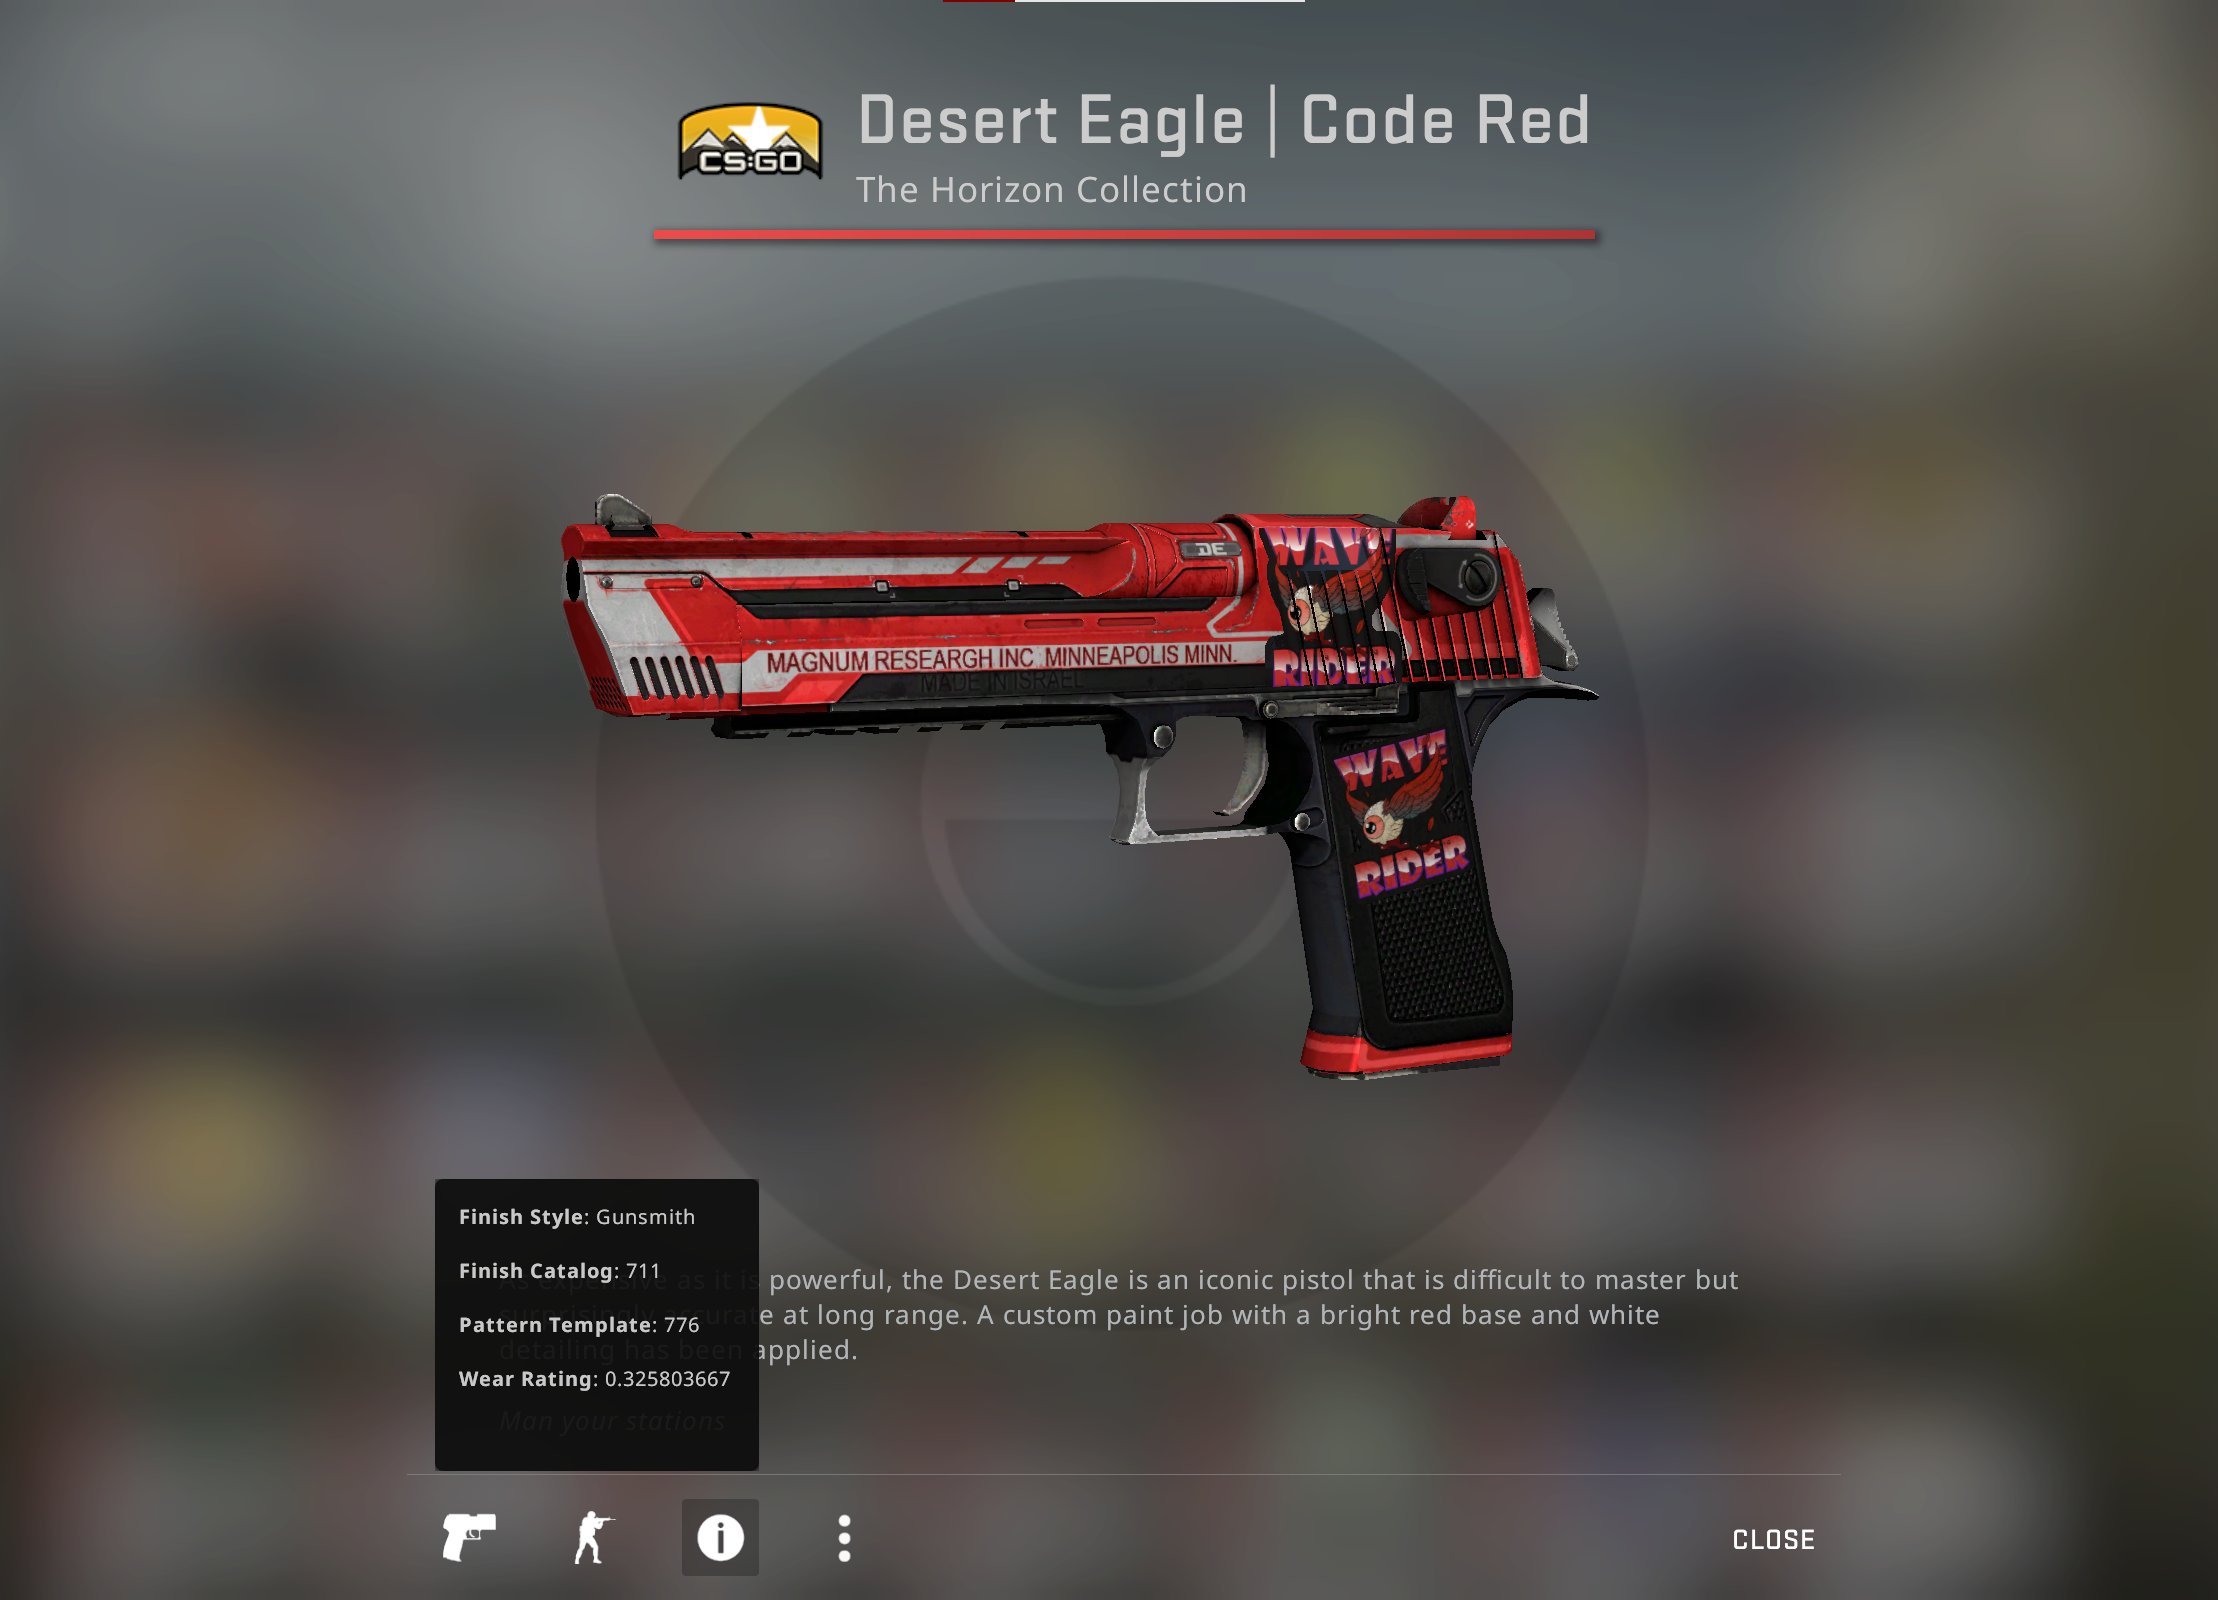 CAZE GAMING on X: 💰DEAGLE CODE RED GIVEAWAY💰 Lil pop-up